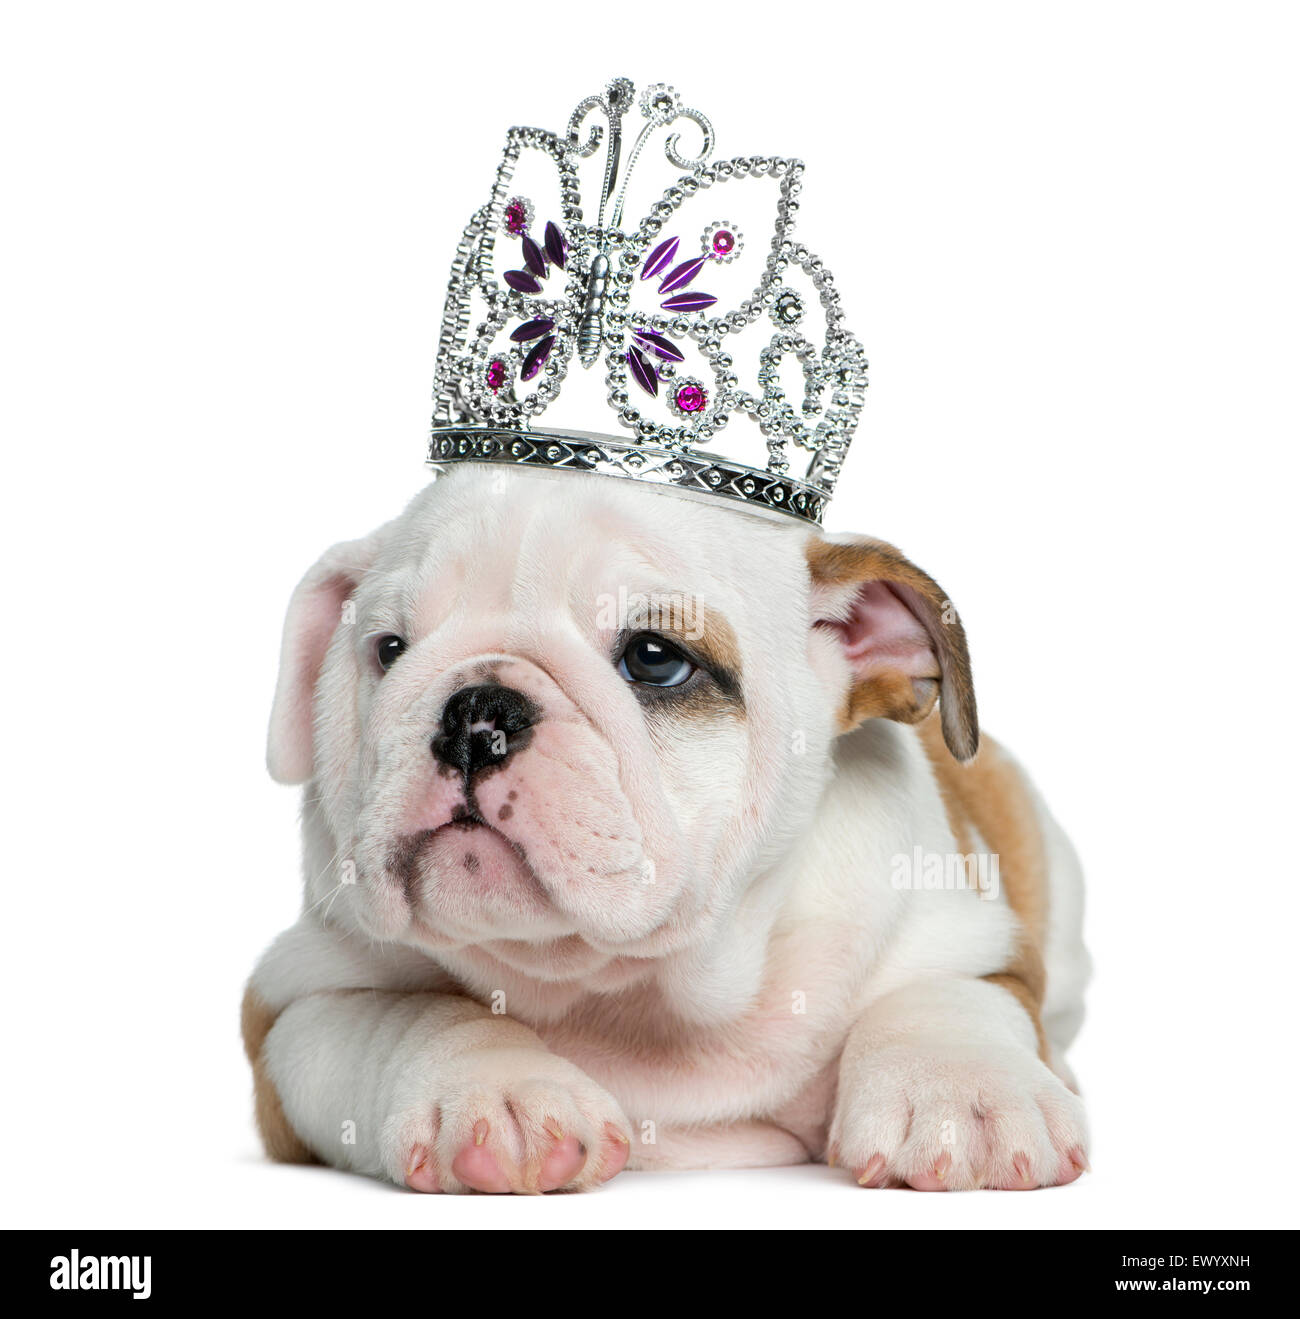 English bulldog puppy wearing a diadem in front of white background Stock Photo